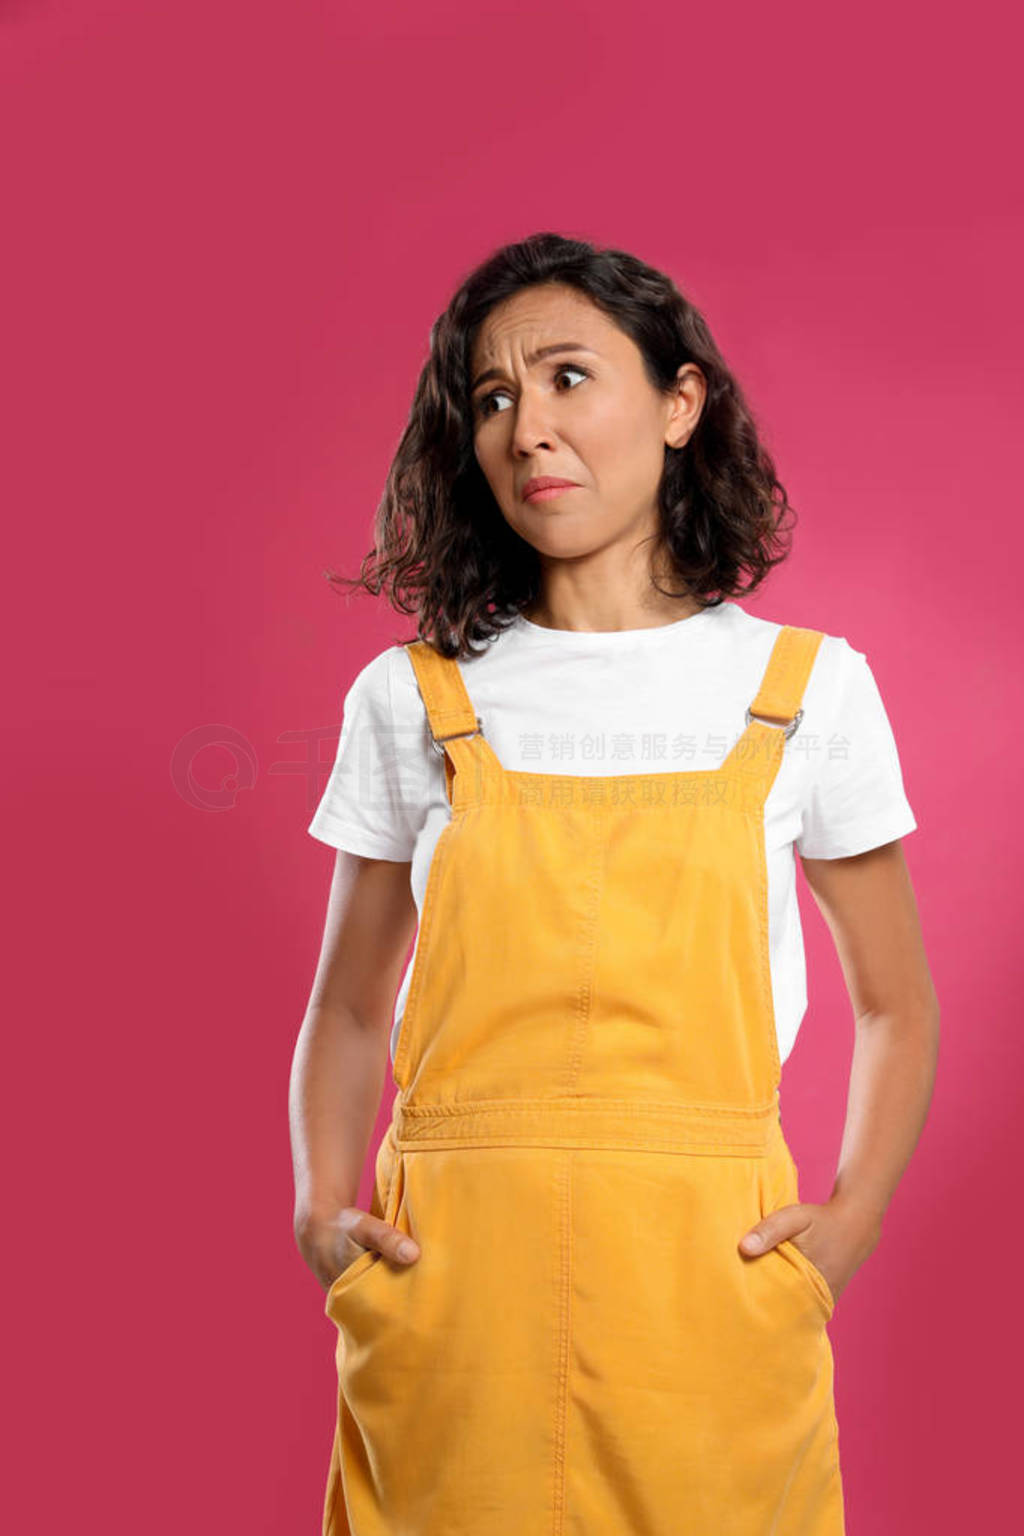 Emotional young woman in casual outfit on pink background